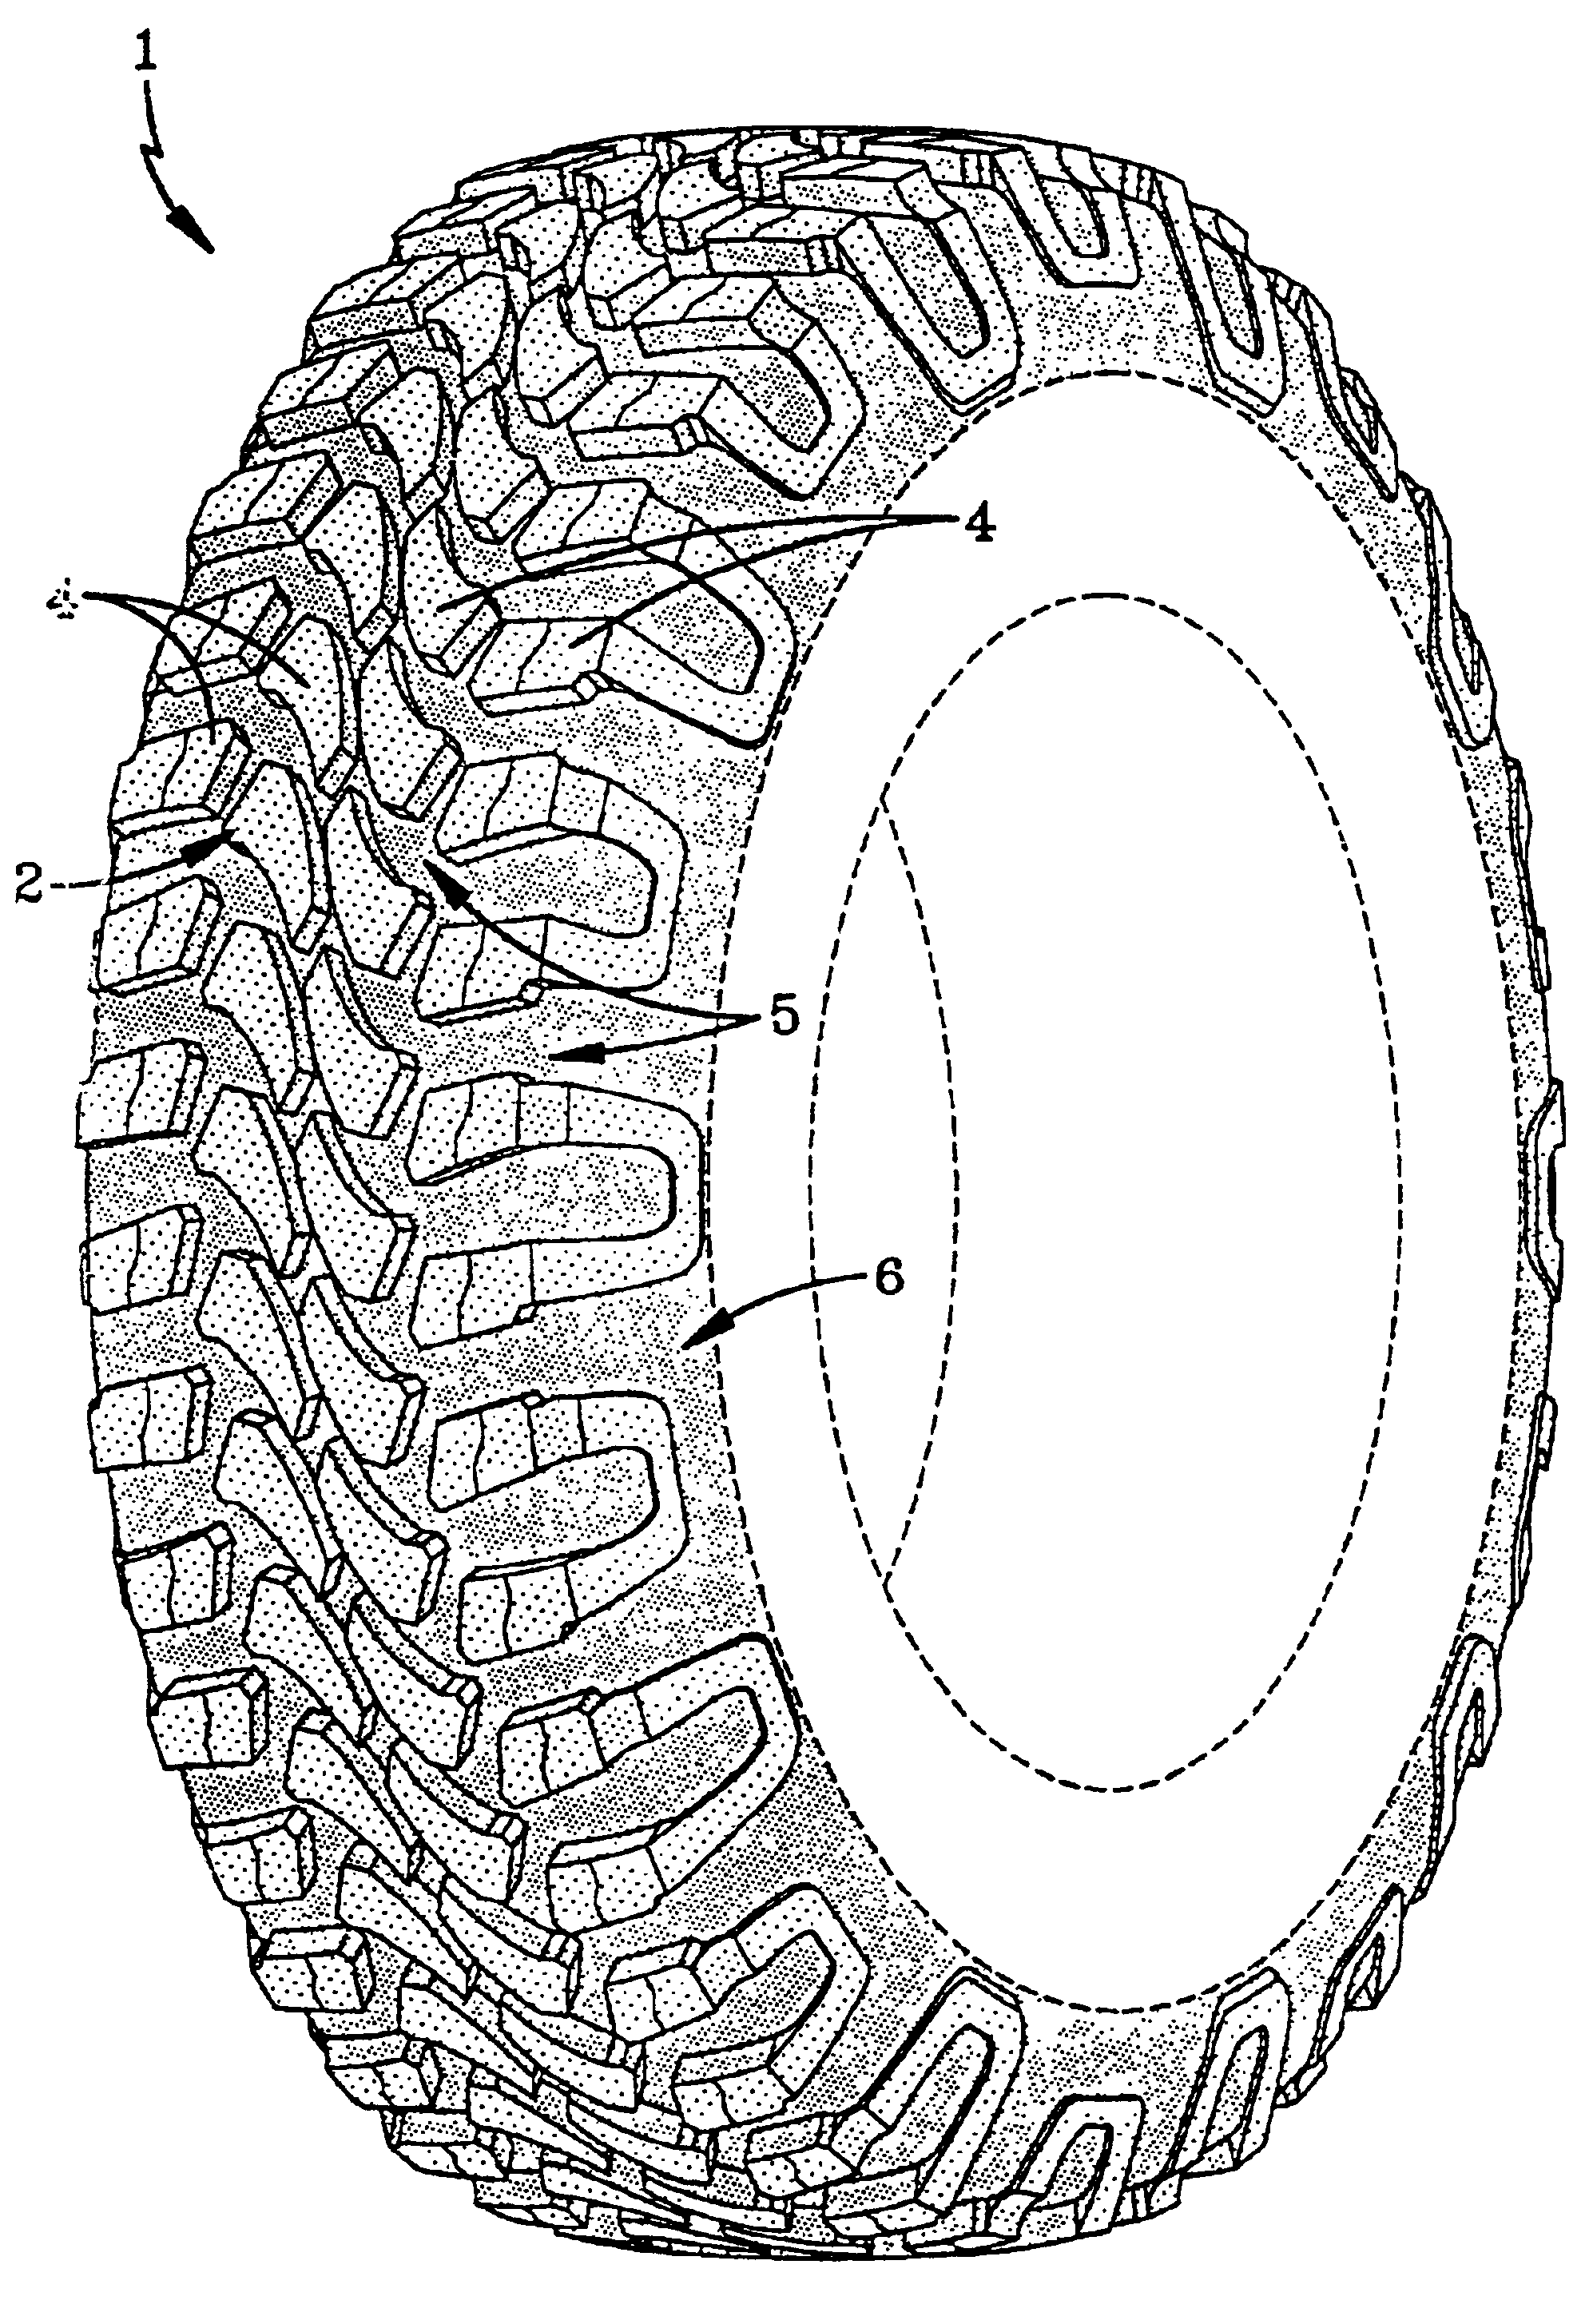 Tire with configured rubber sidewall designed to be ground-contacting reinforced with carbon black, starch and silica